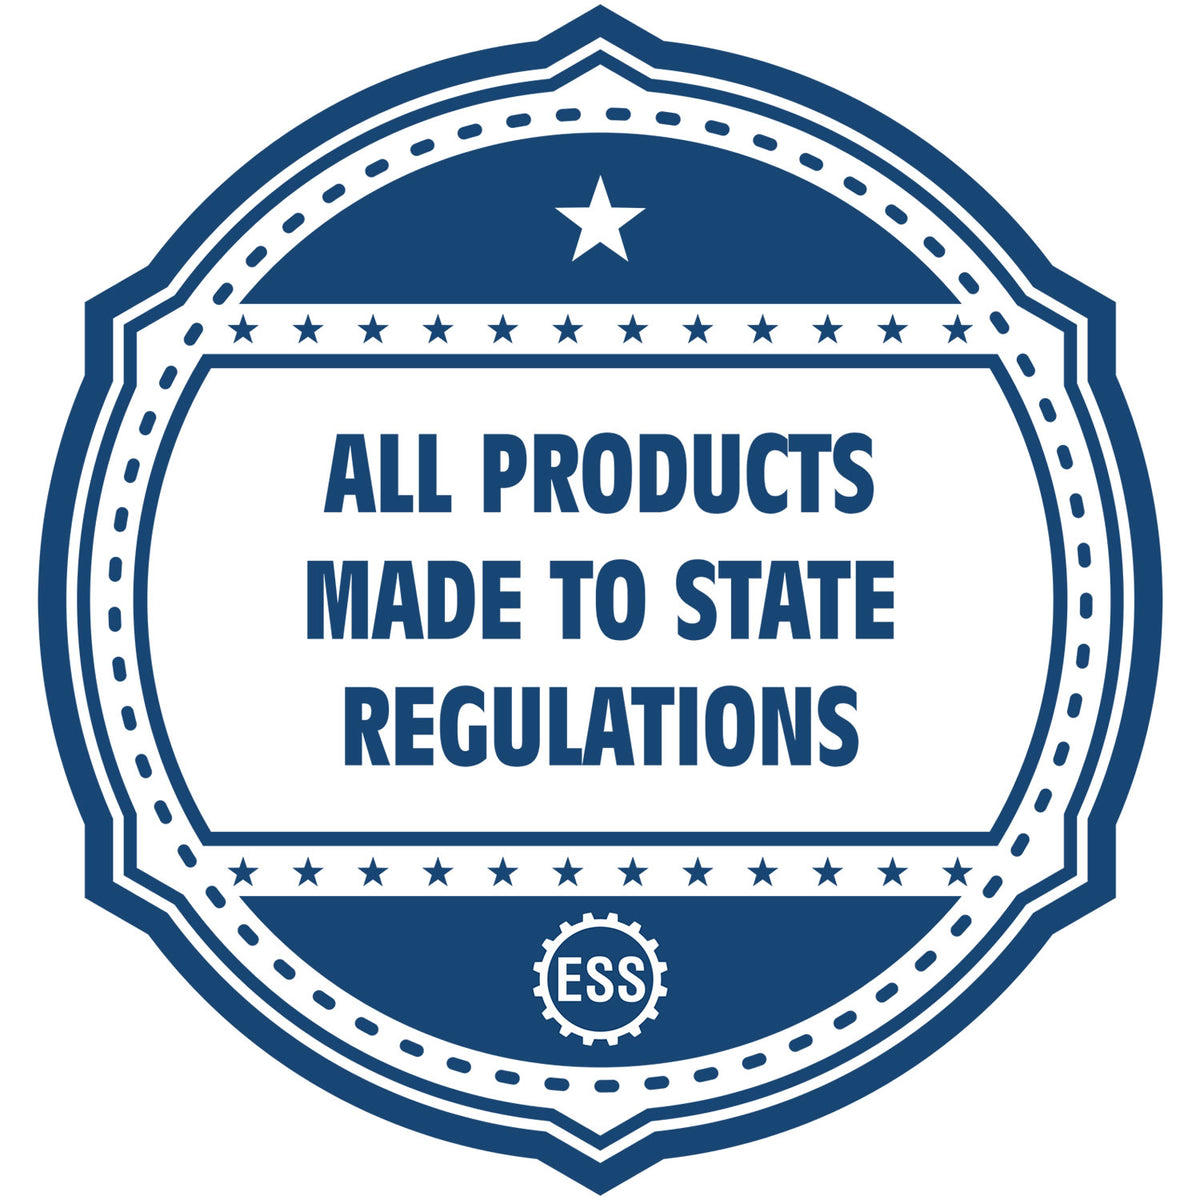 A blue icon or badge for the Self-Inking Missouri Geologist Stamp showing that this product is made in compliance with state regulations.